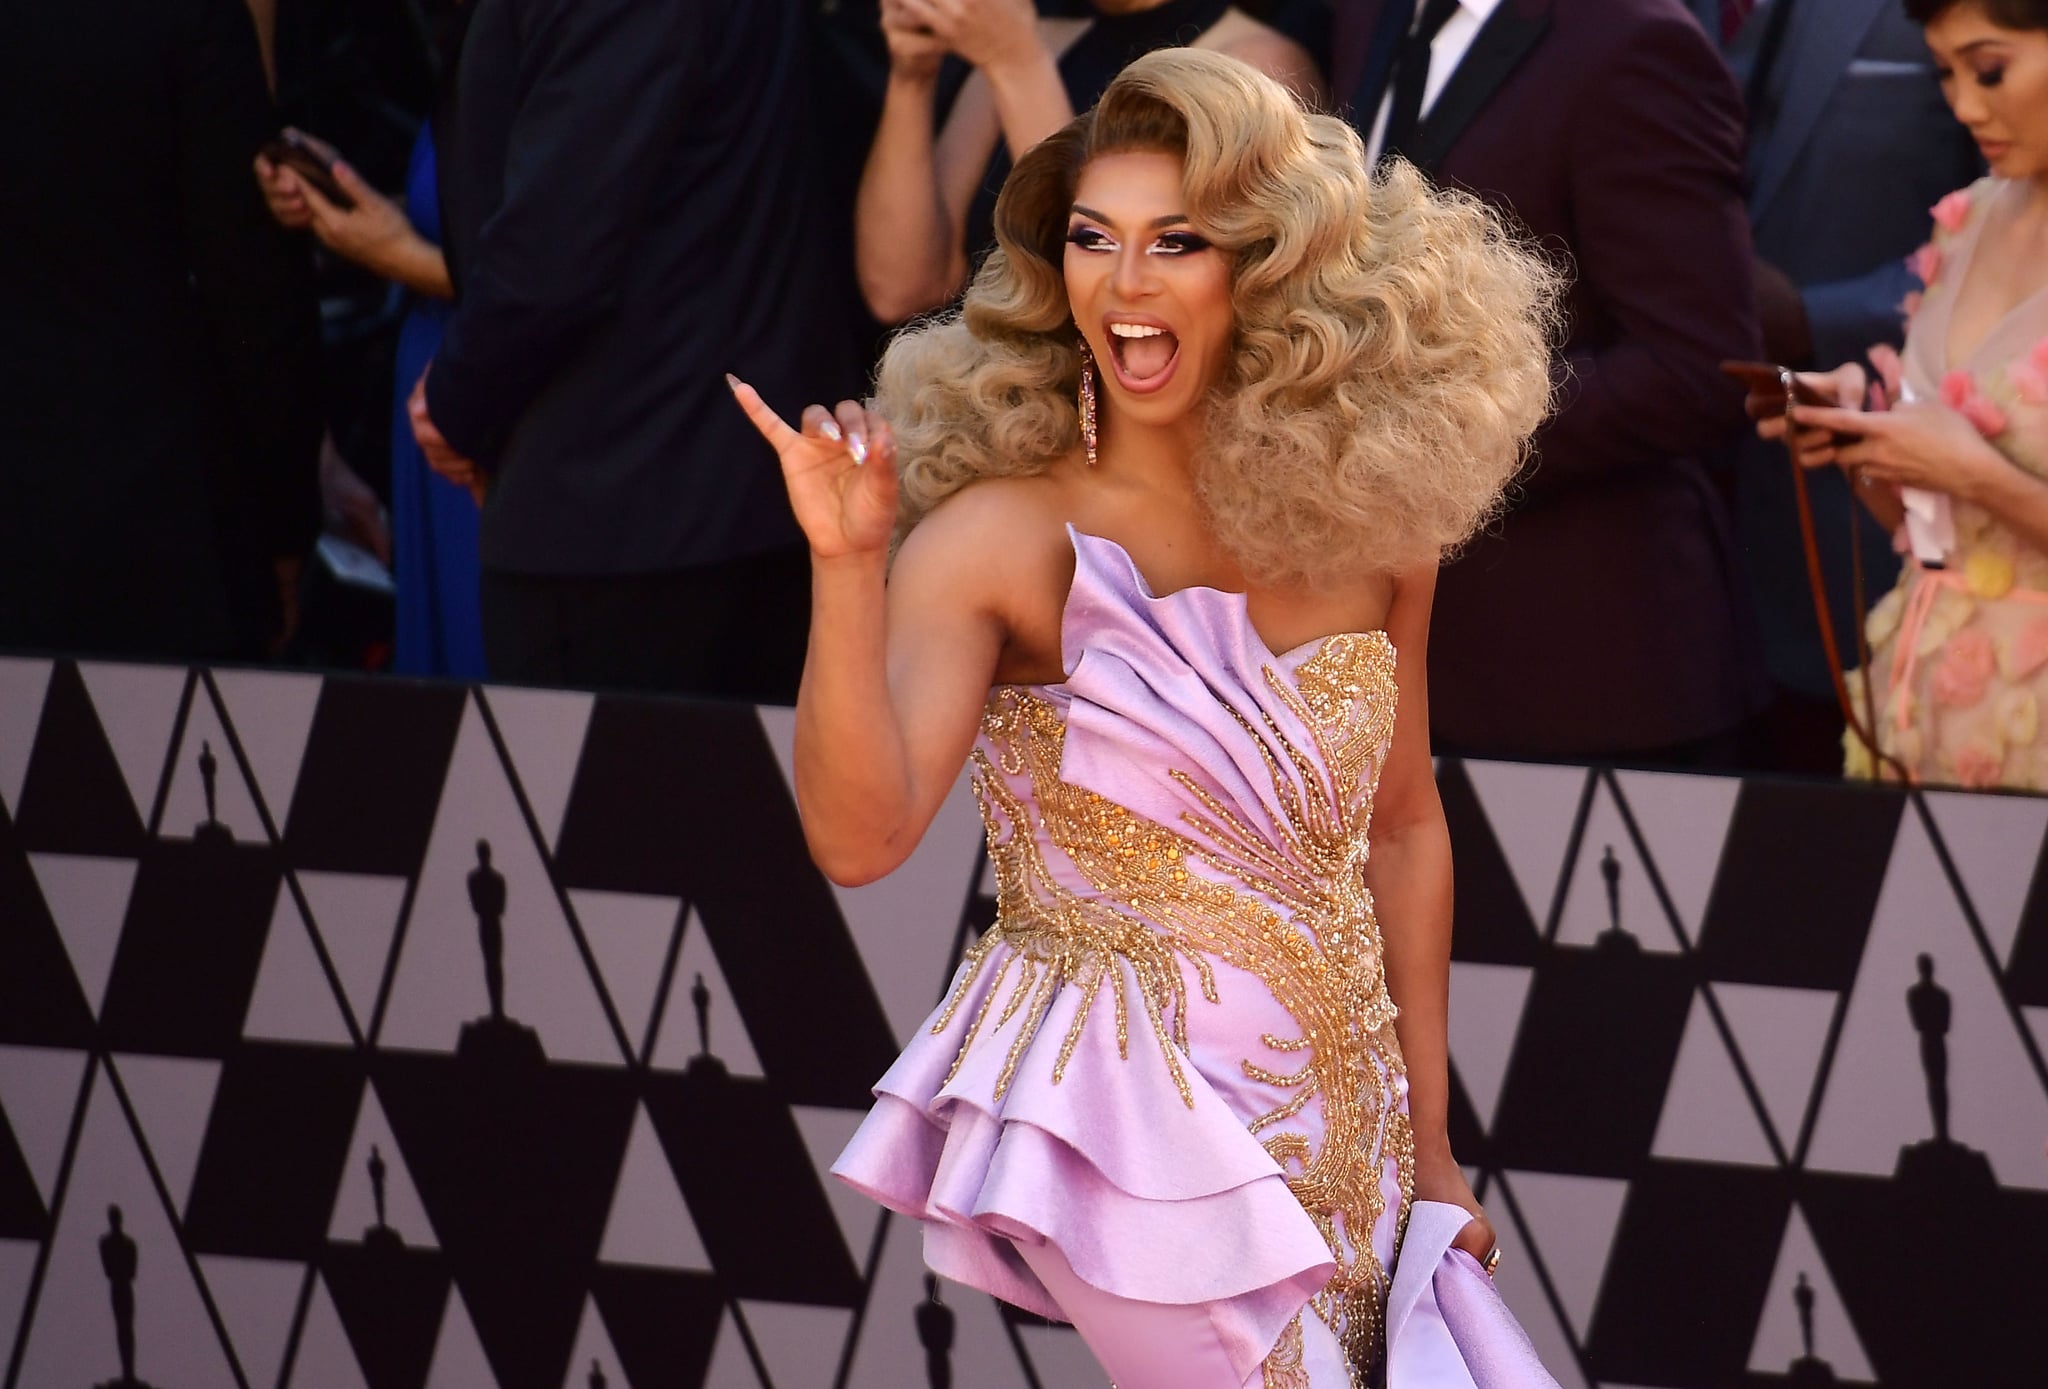 HOLLYWOOD, CALIFORNIA - FEBRUARY 24: Shangela attends the 91st Annual Academy Awards at Hollywood and Highland on February 24, 2019 in Hollywood, California. (Photo by Matt Winkelmeyer/Getty Images)